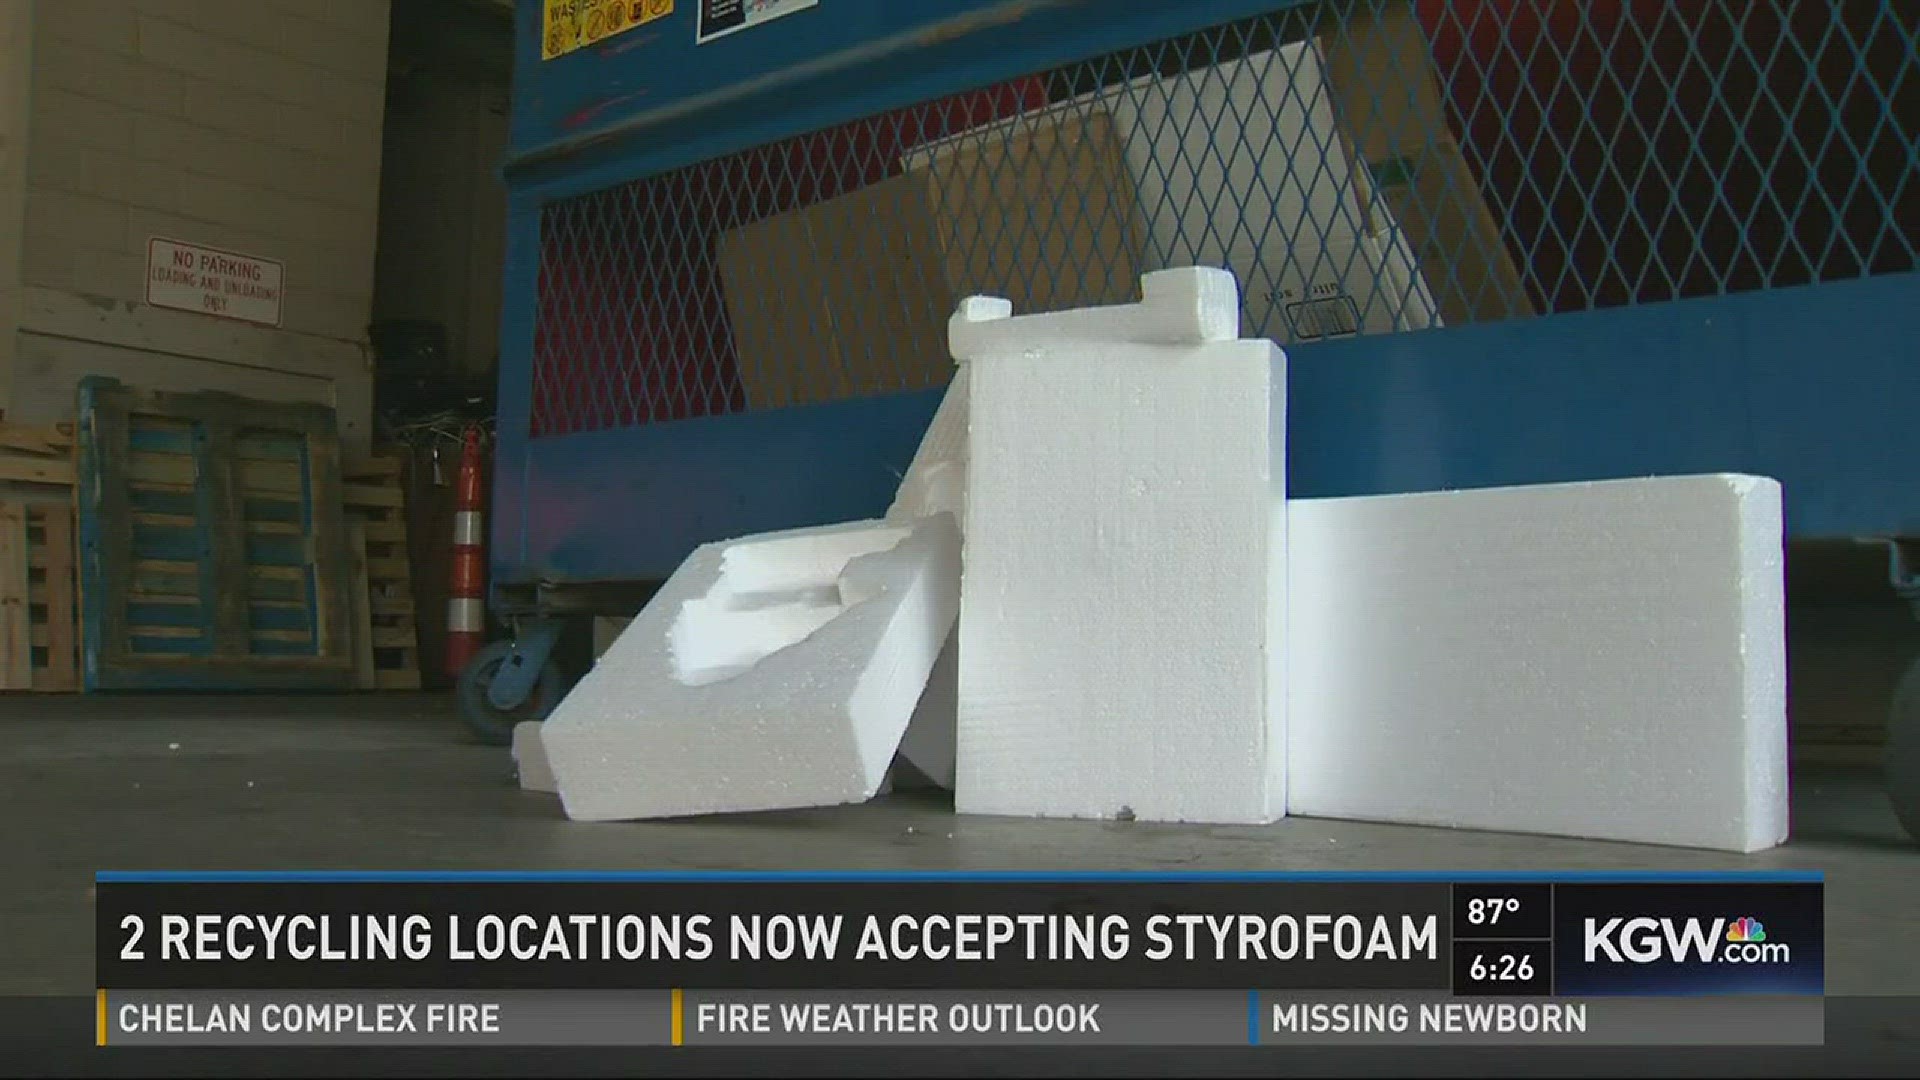 Two recycling locations now accepting Styrofoam